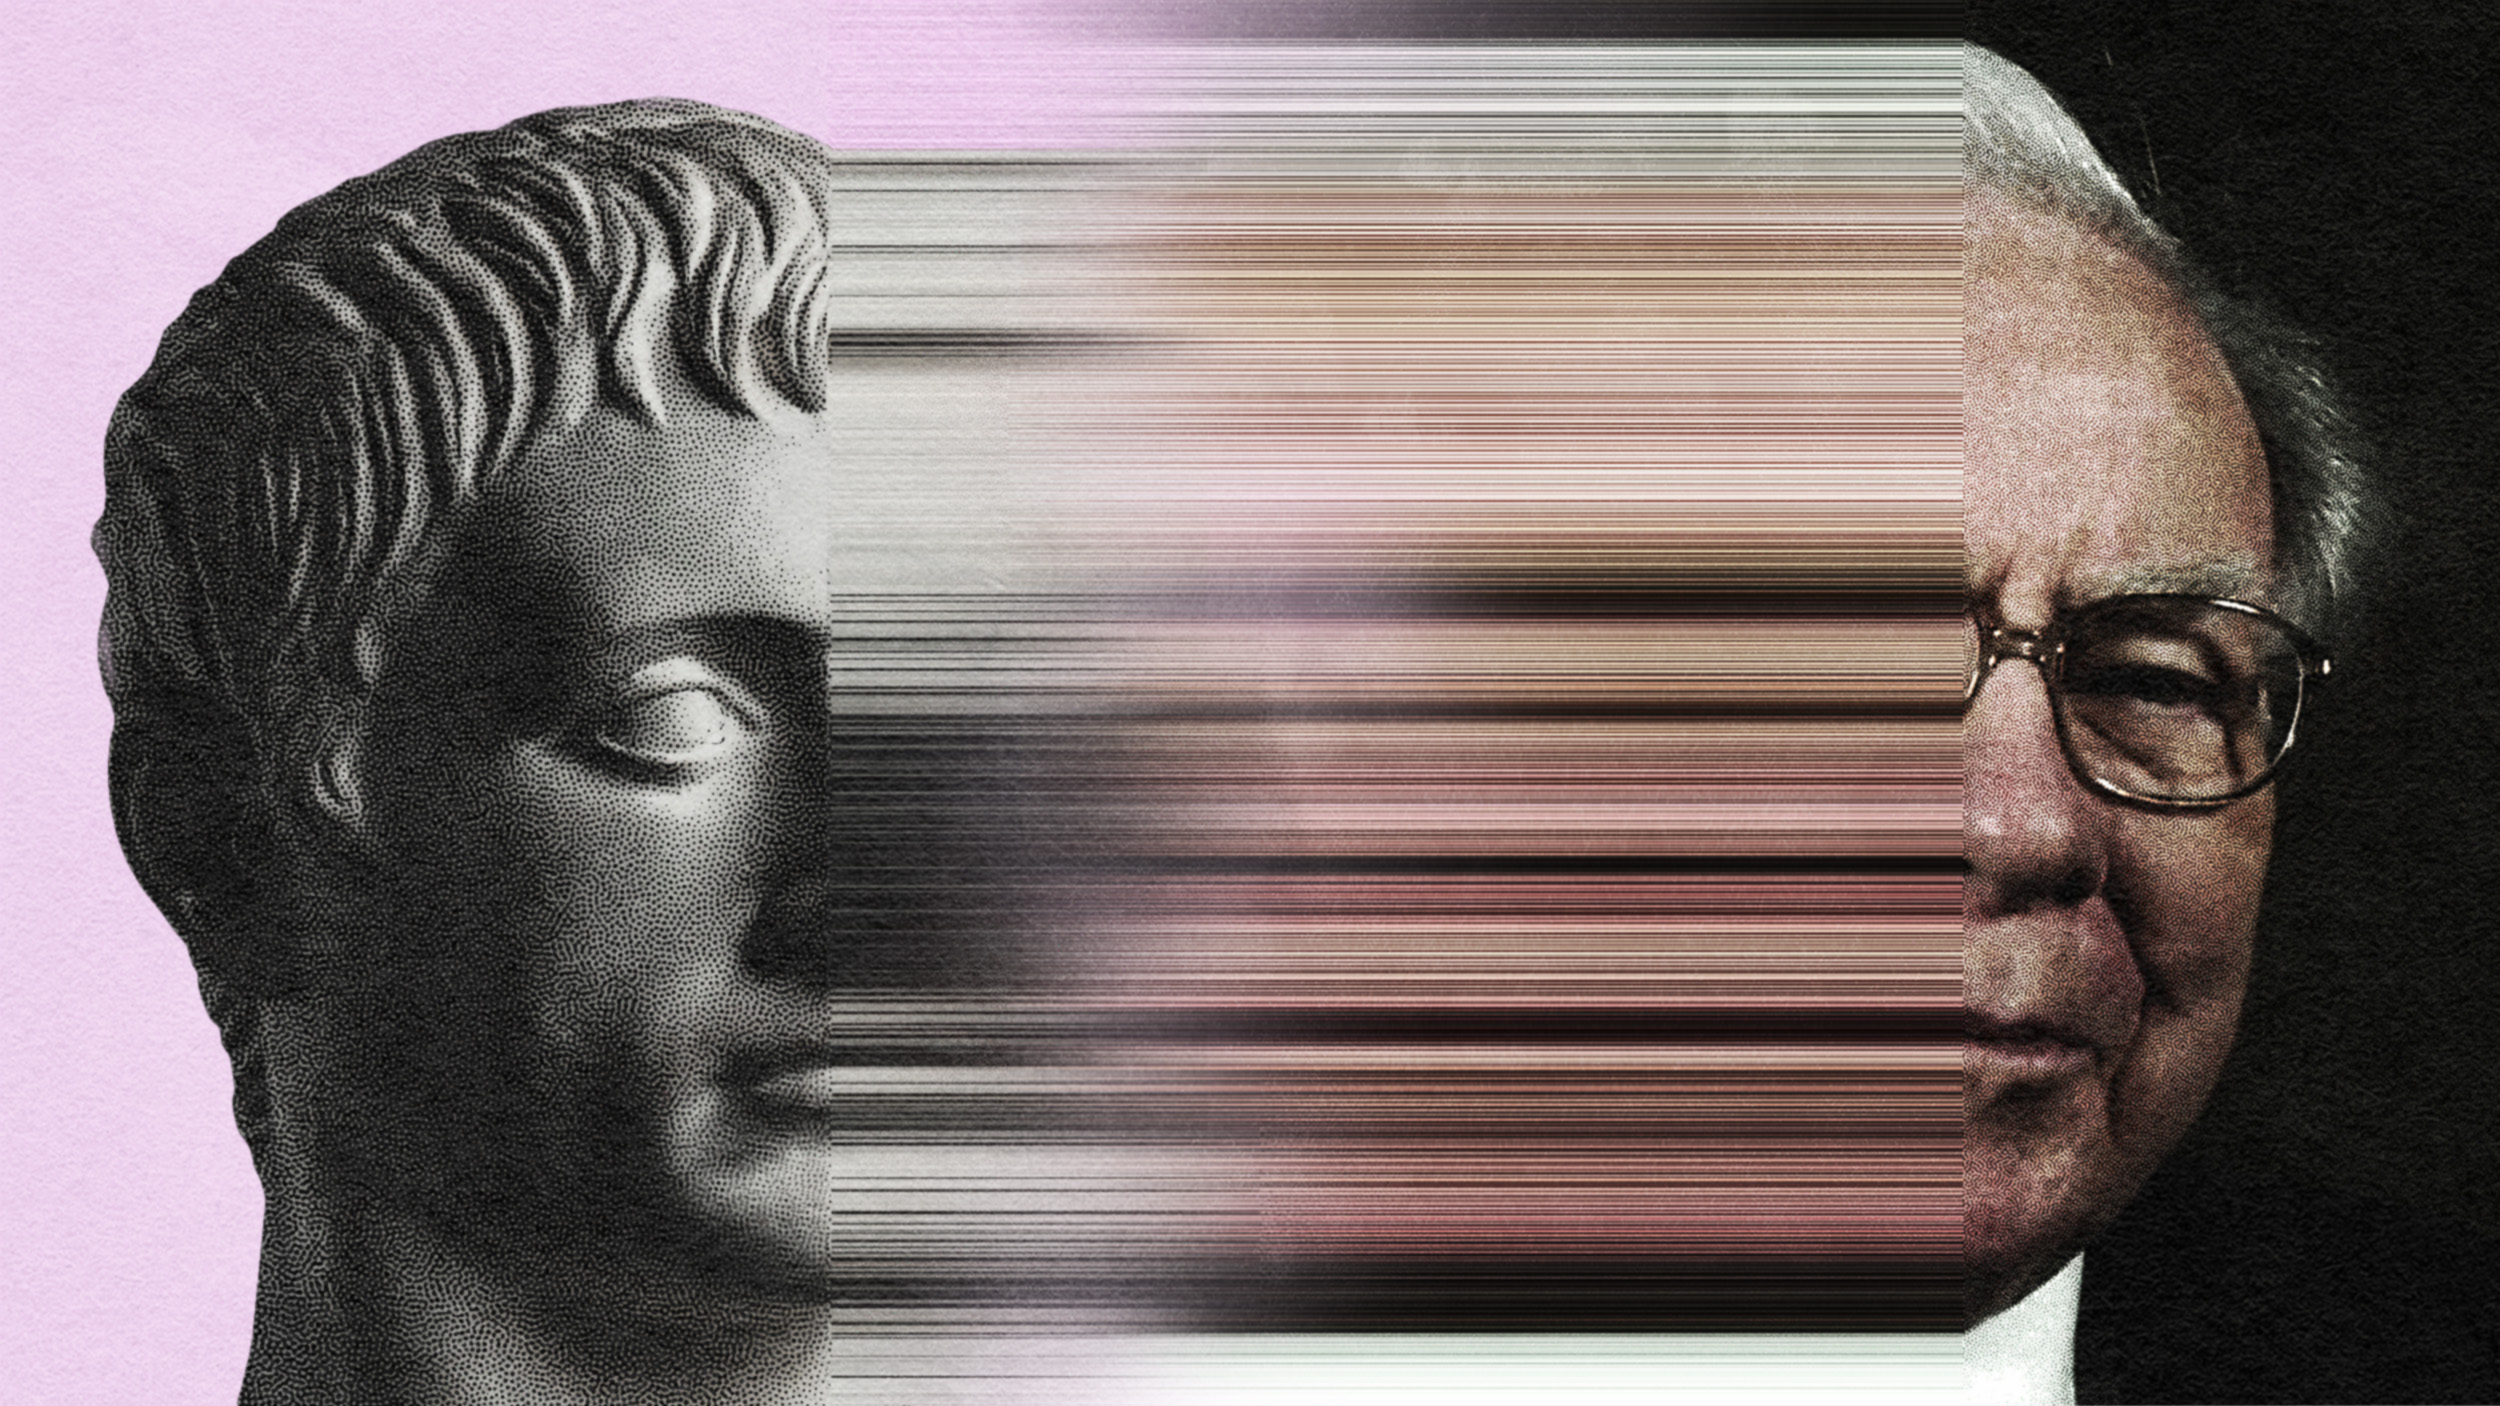 An image showing a marble statue of a man on the left, transitioning with a stoic edge into a distorted, pixelated region, followed by part of a man's face on the right.